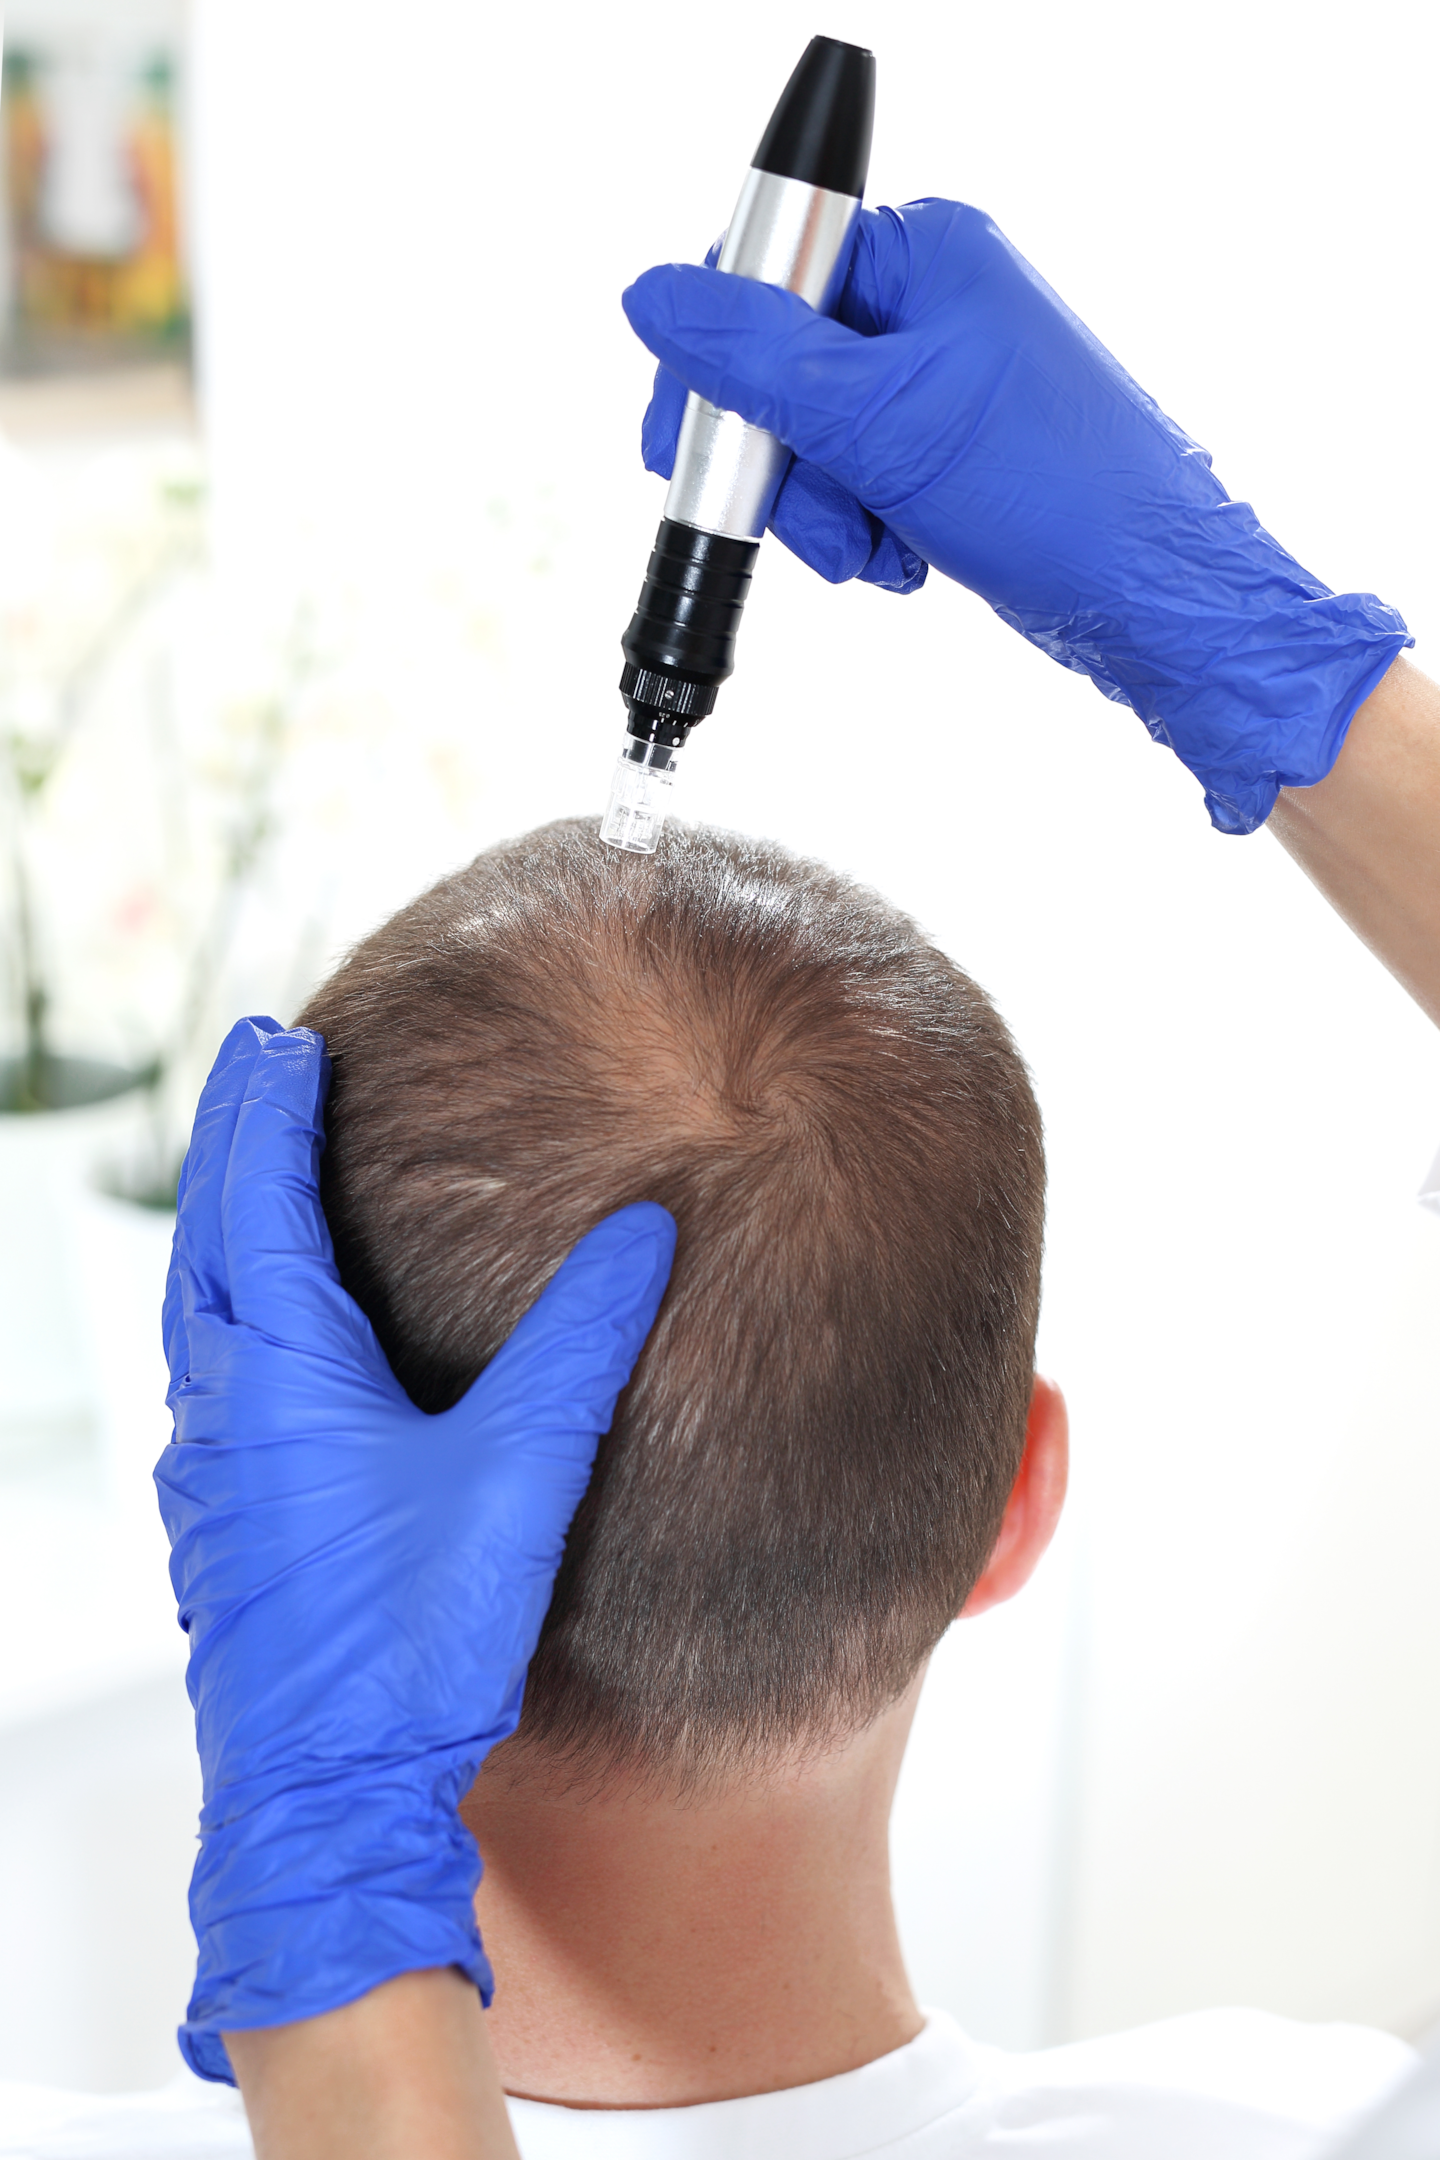 A man getting scalp microneedling treatment in a clinic